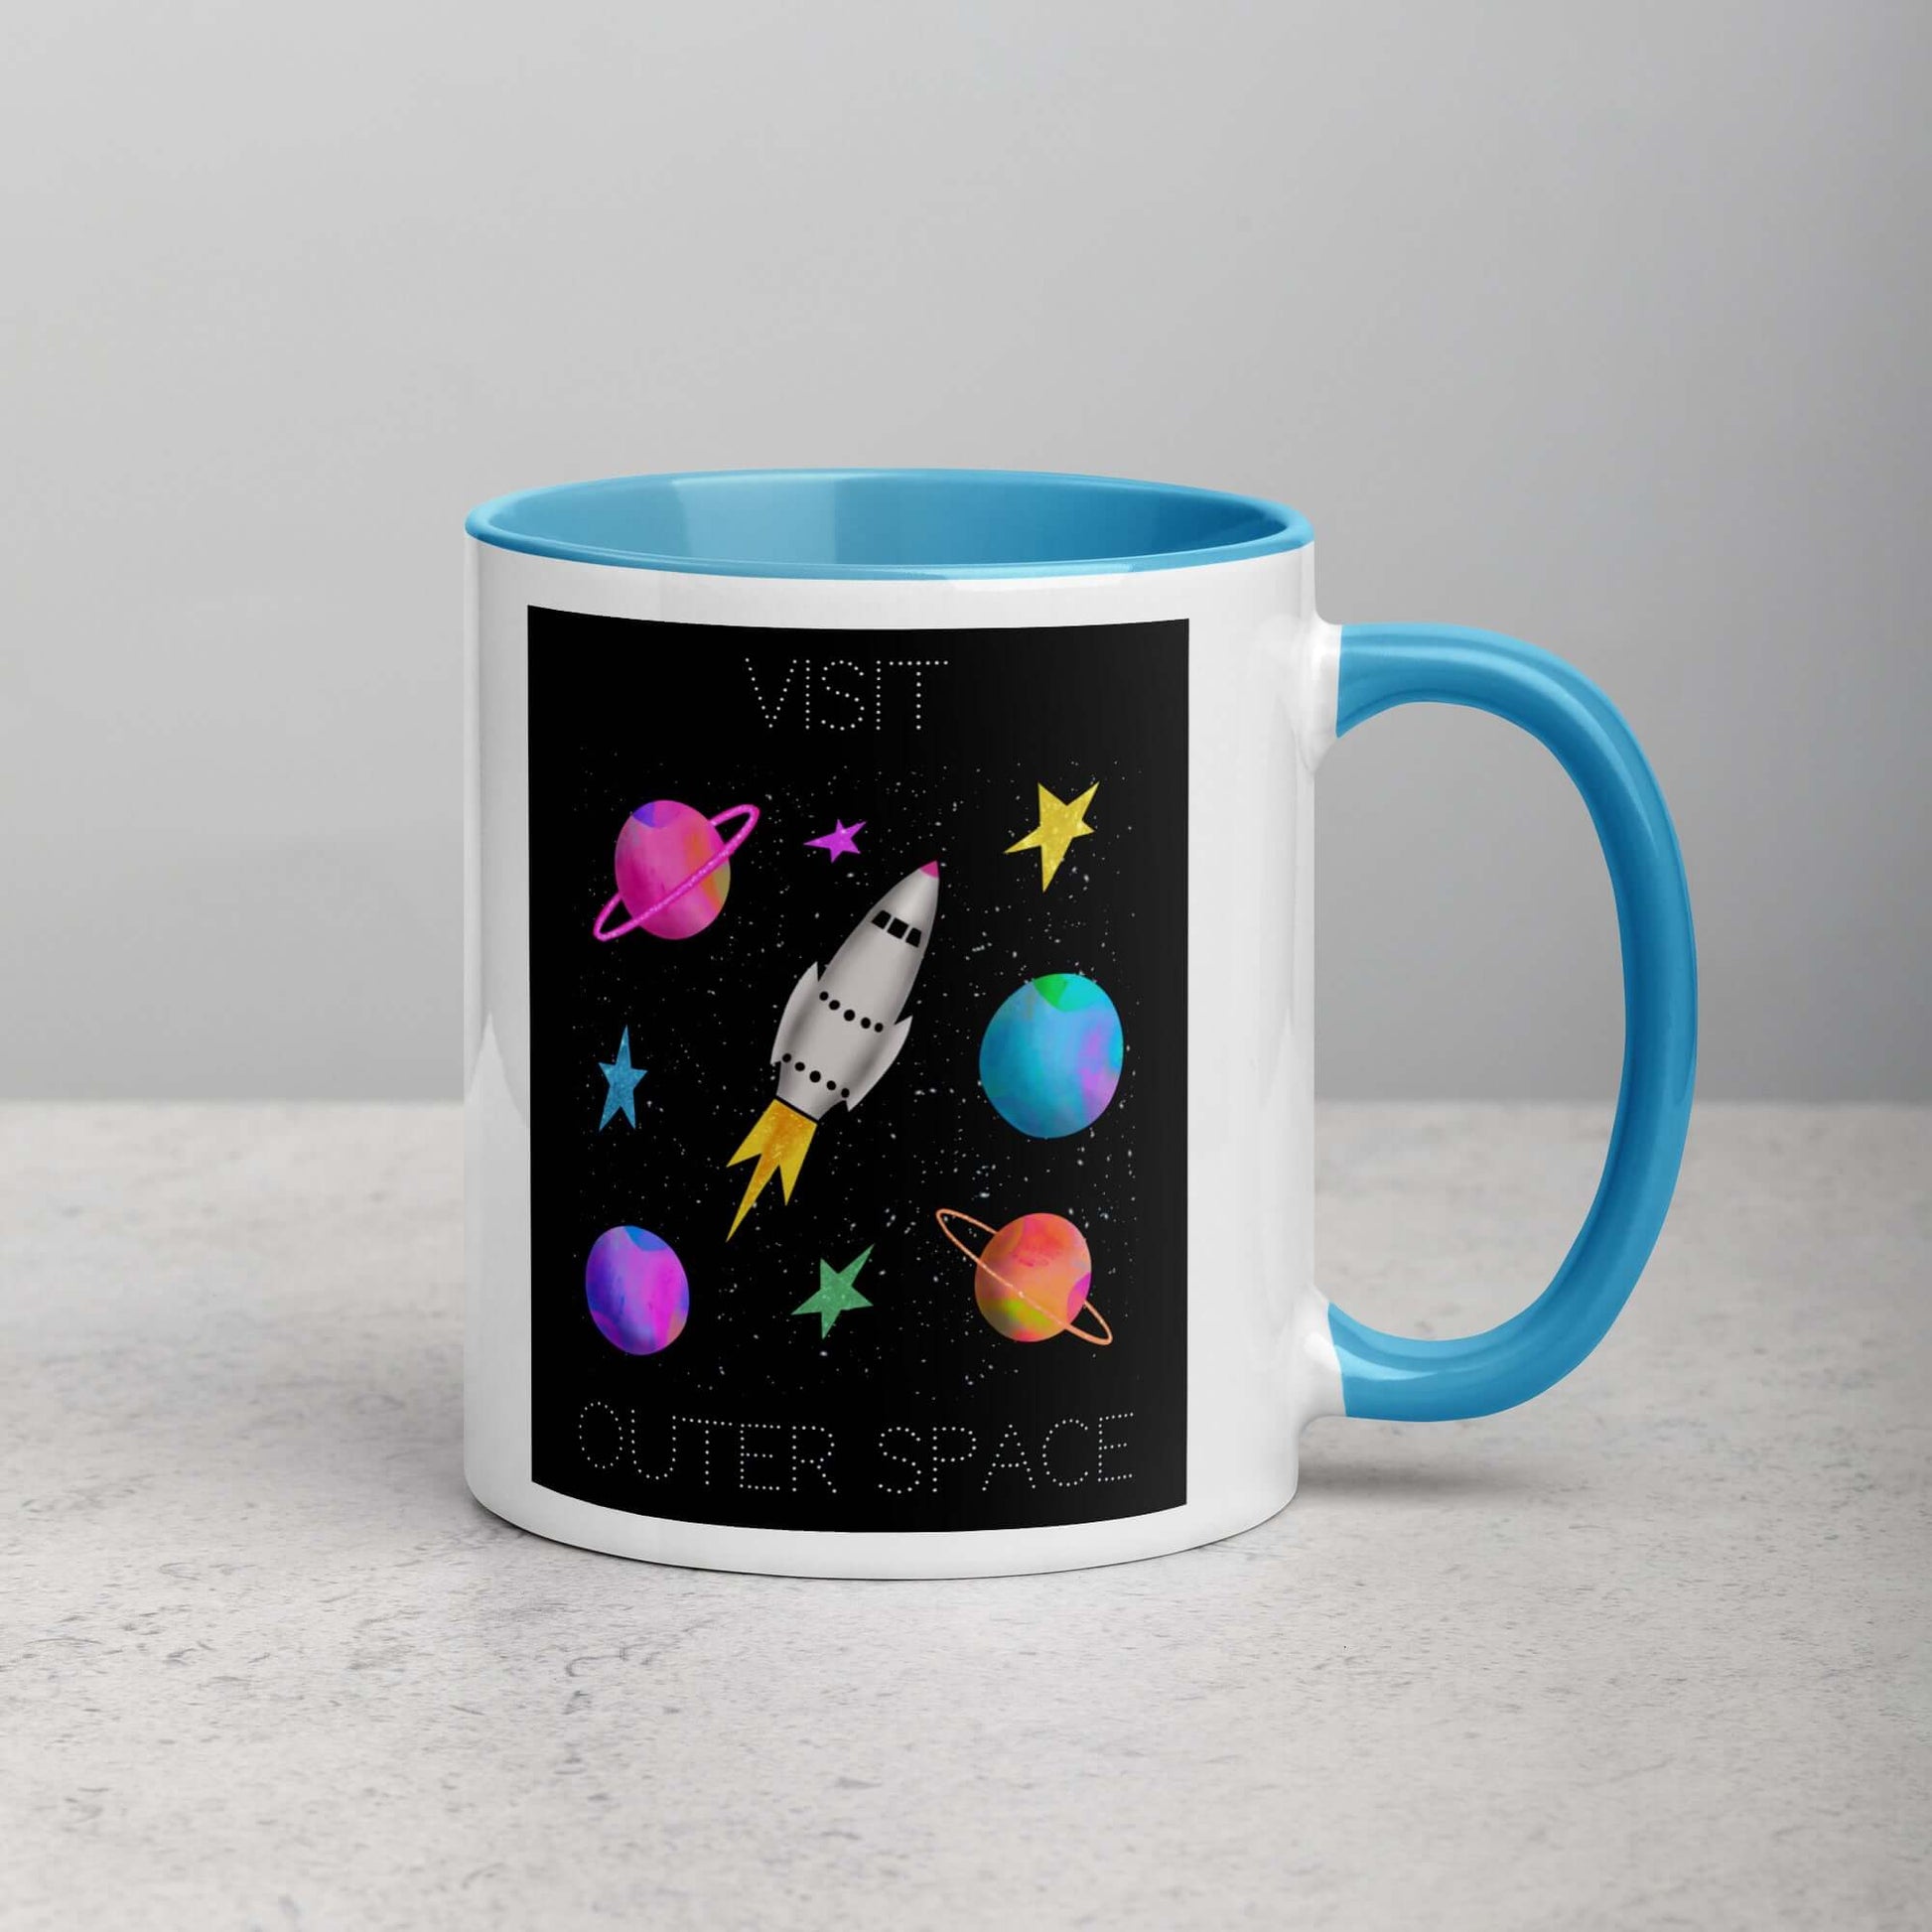 Whimsical Space Rocket with Colorful Planets and Stars on Black Background with Text “Visit Outer Space” Mug with Light Blue Color Inside Right Handed Front View